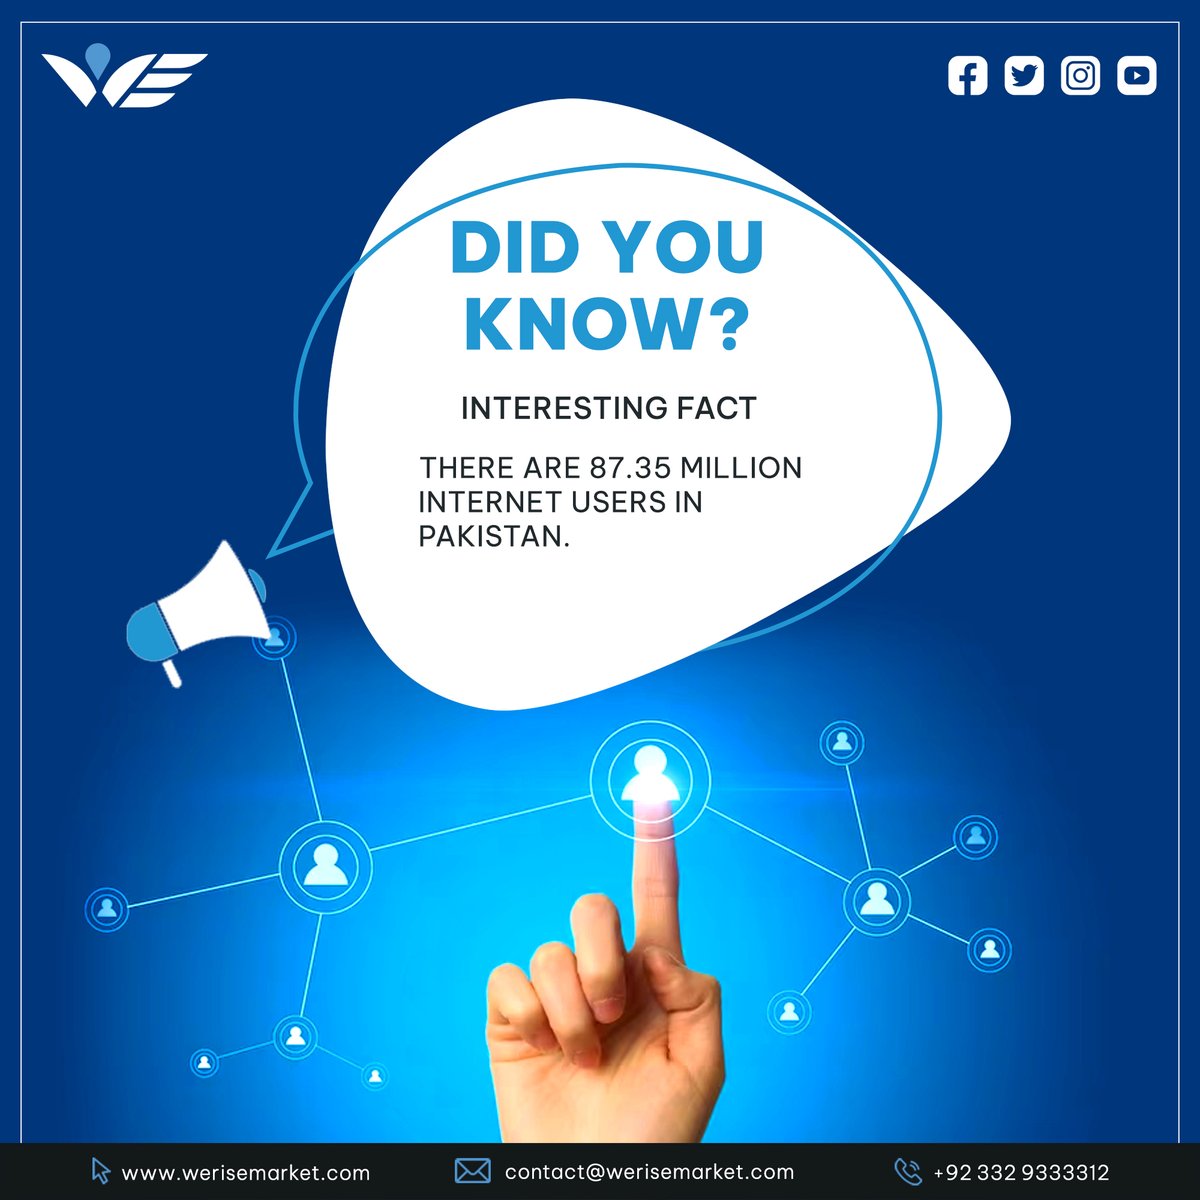 𝐃𝐢𝐝 𝐲𝐨𝐮 𝐤𝐧𝐨𝐰? 𝟖𝟕.𝟑𝟓 𝐁𝐢𝐥𝐥𝐢𝐨𝐧 people use the internet in Pakistan. This is why the online presence of your business is crucial. come to us! 𝐂𝐚𝐥𝐥 +92 332 933 3312 𝐖𝐞𝐛𝐬𝐢𝐭𝐞: werisemarket.com